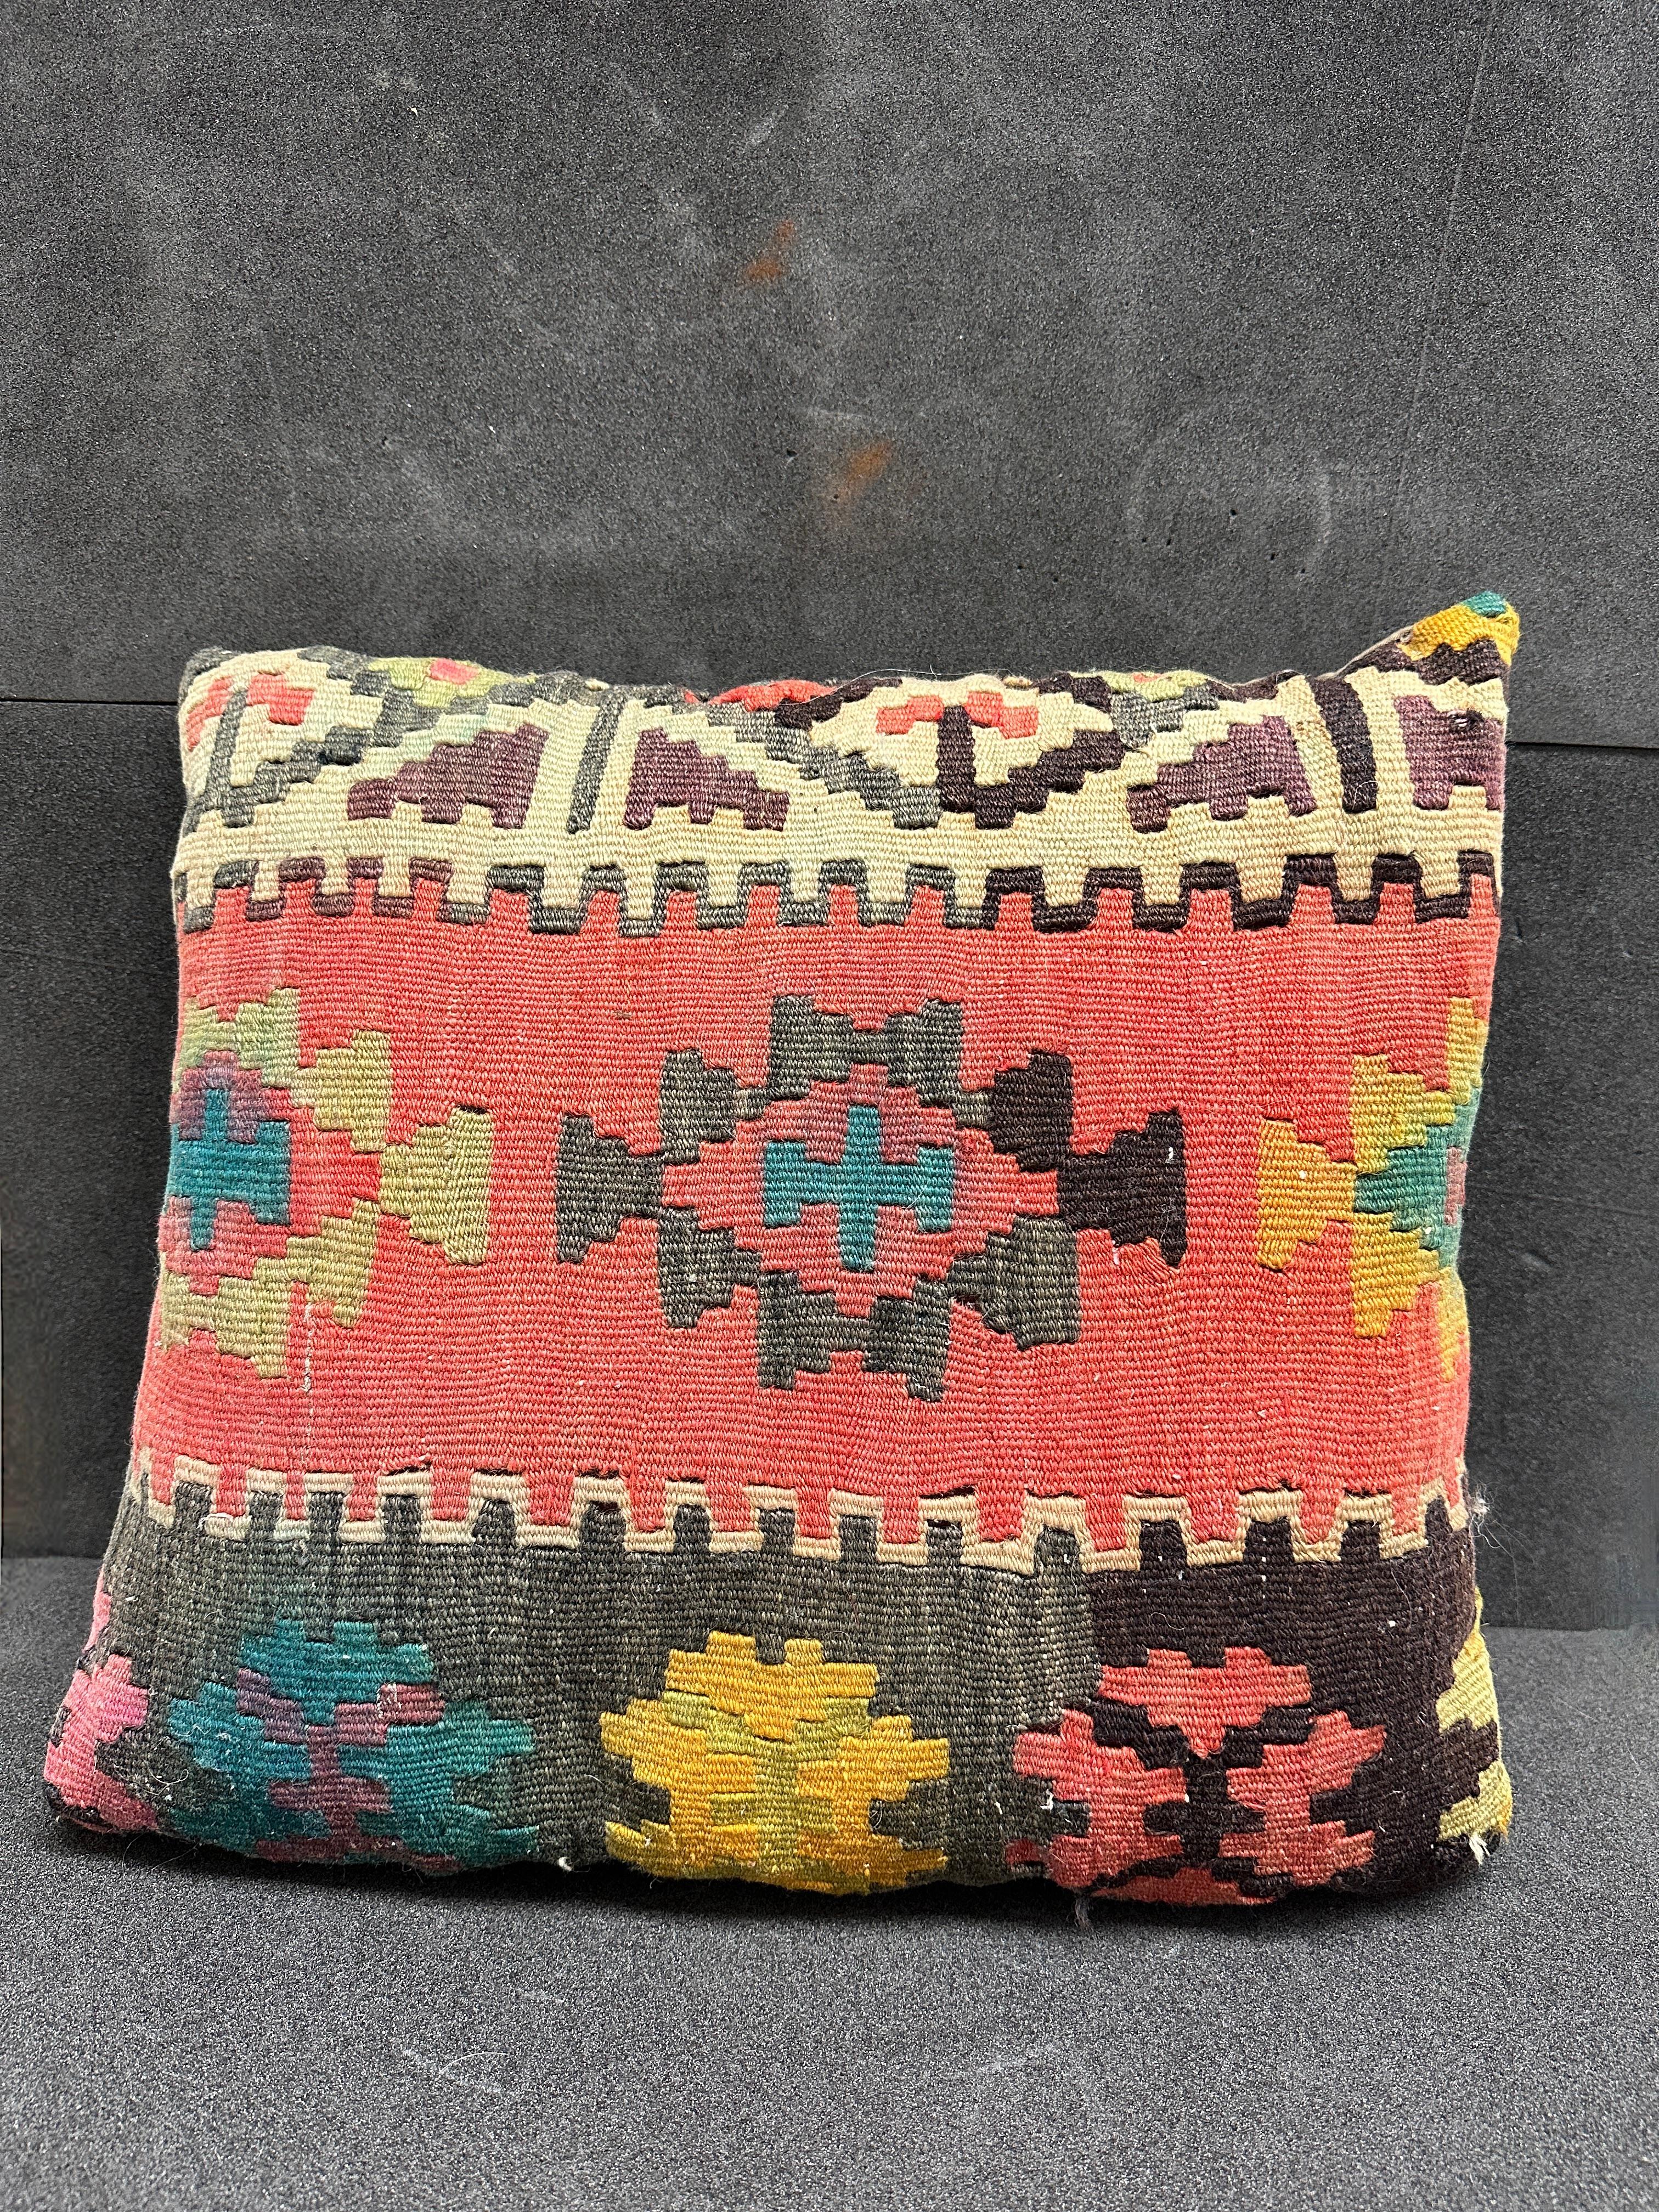 Gorgeous oriental pillow, cushion or seat pillow. Original vintage cushions made from Oriental rugs. Estimated to date from the 1950s-1960s, the cushions themselves are vintage made (not recently made from vintage rugs) as can be seen by the